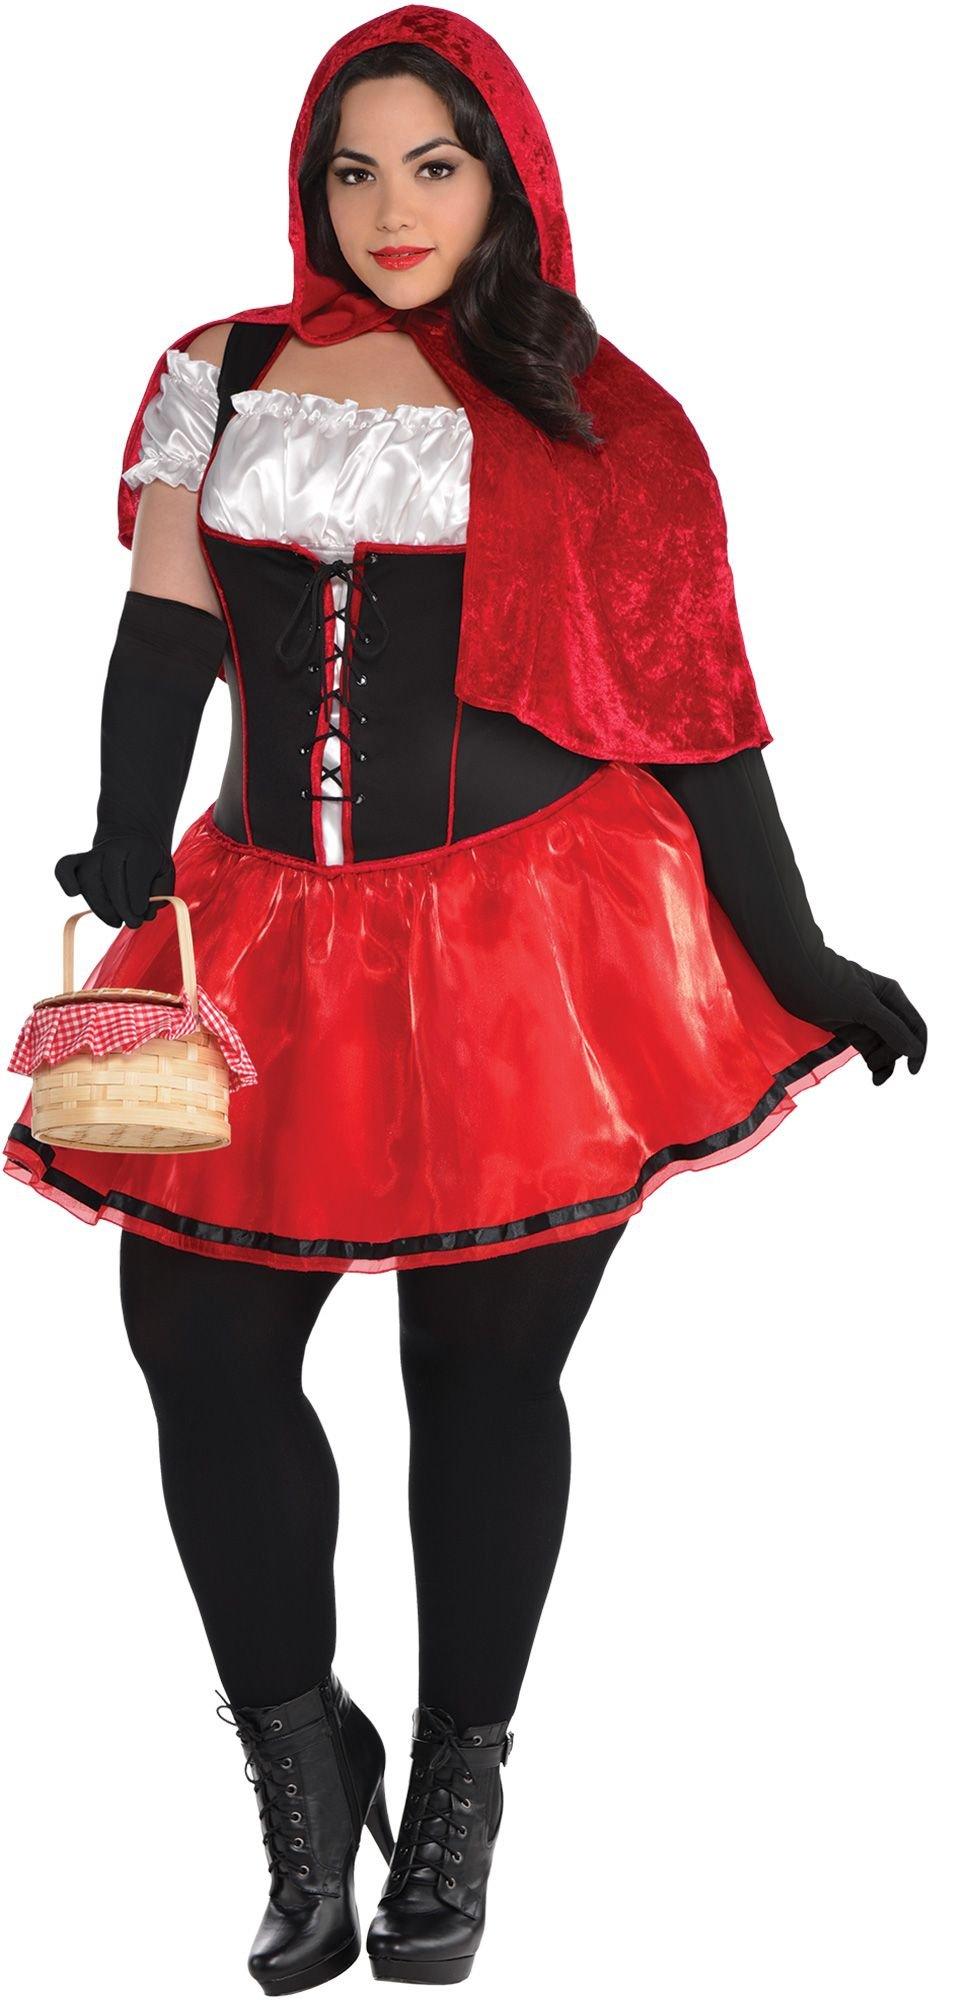 Adult Sassy Red Hood Costume - Plus Size | Party City